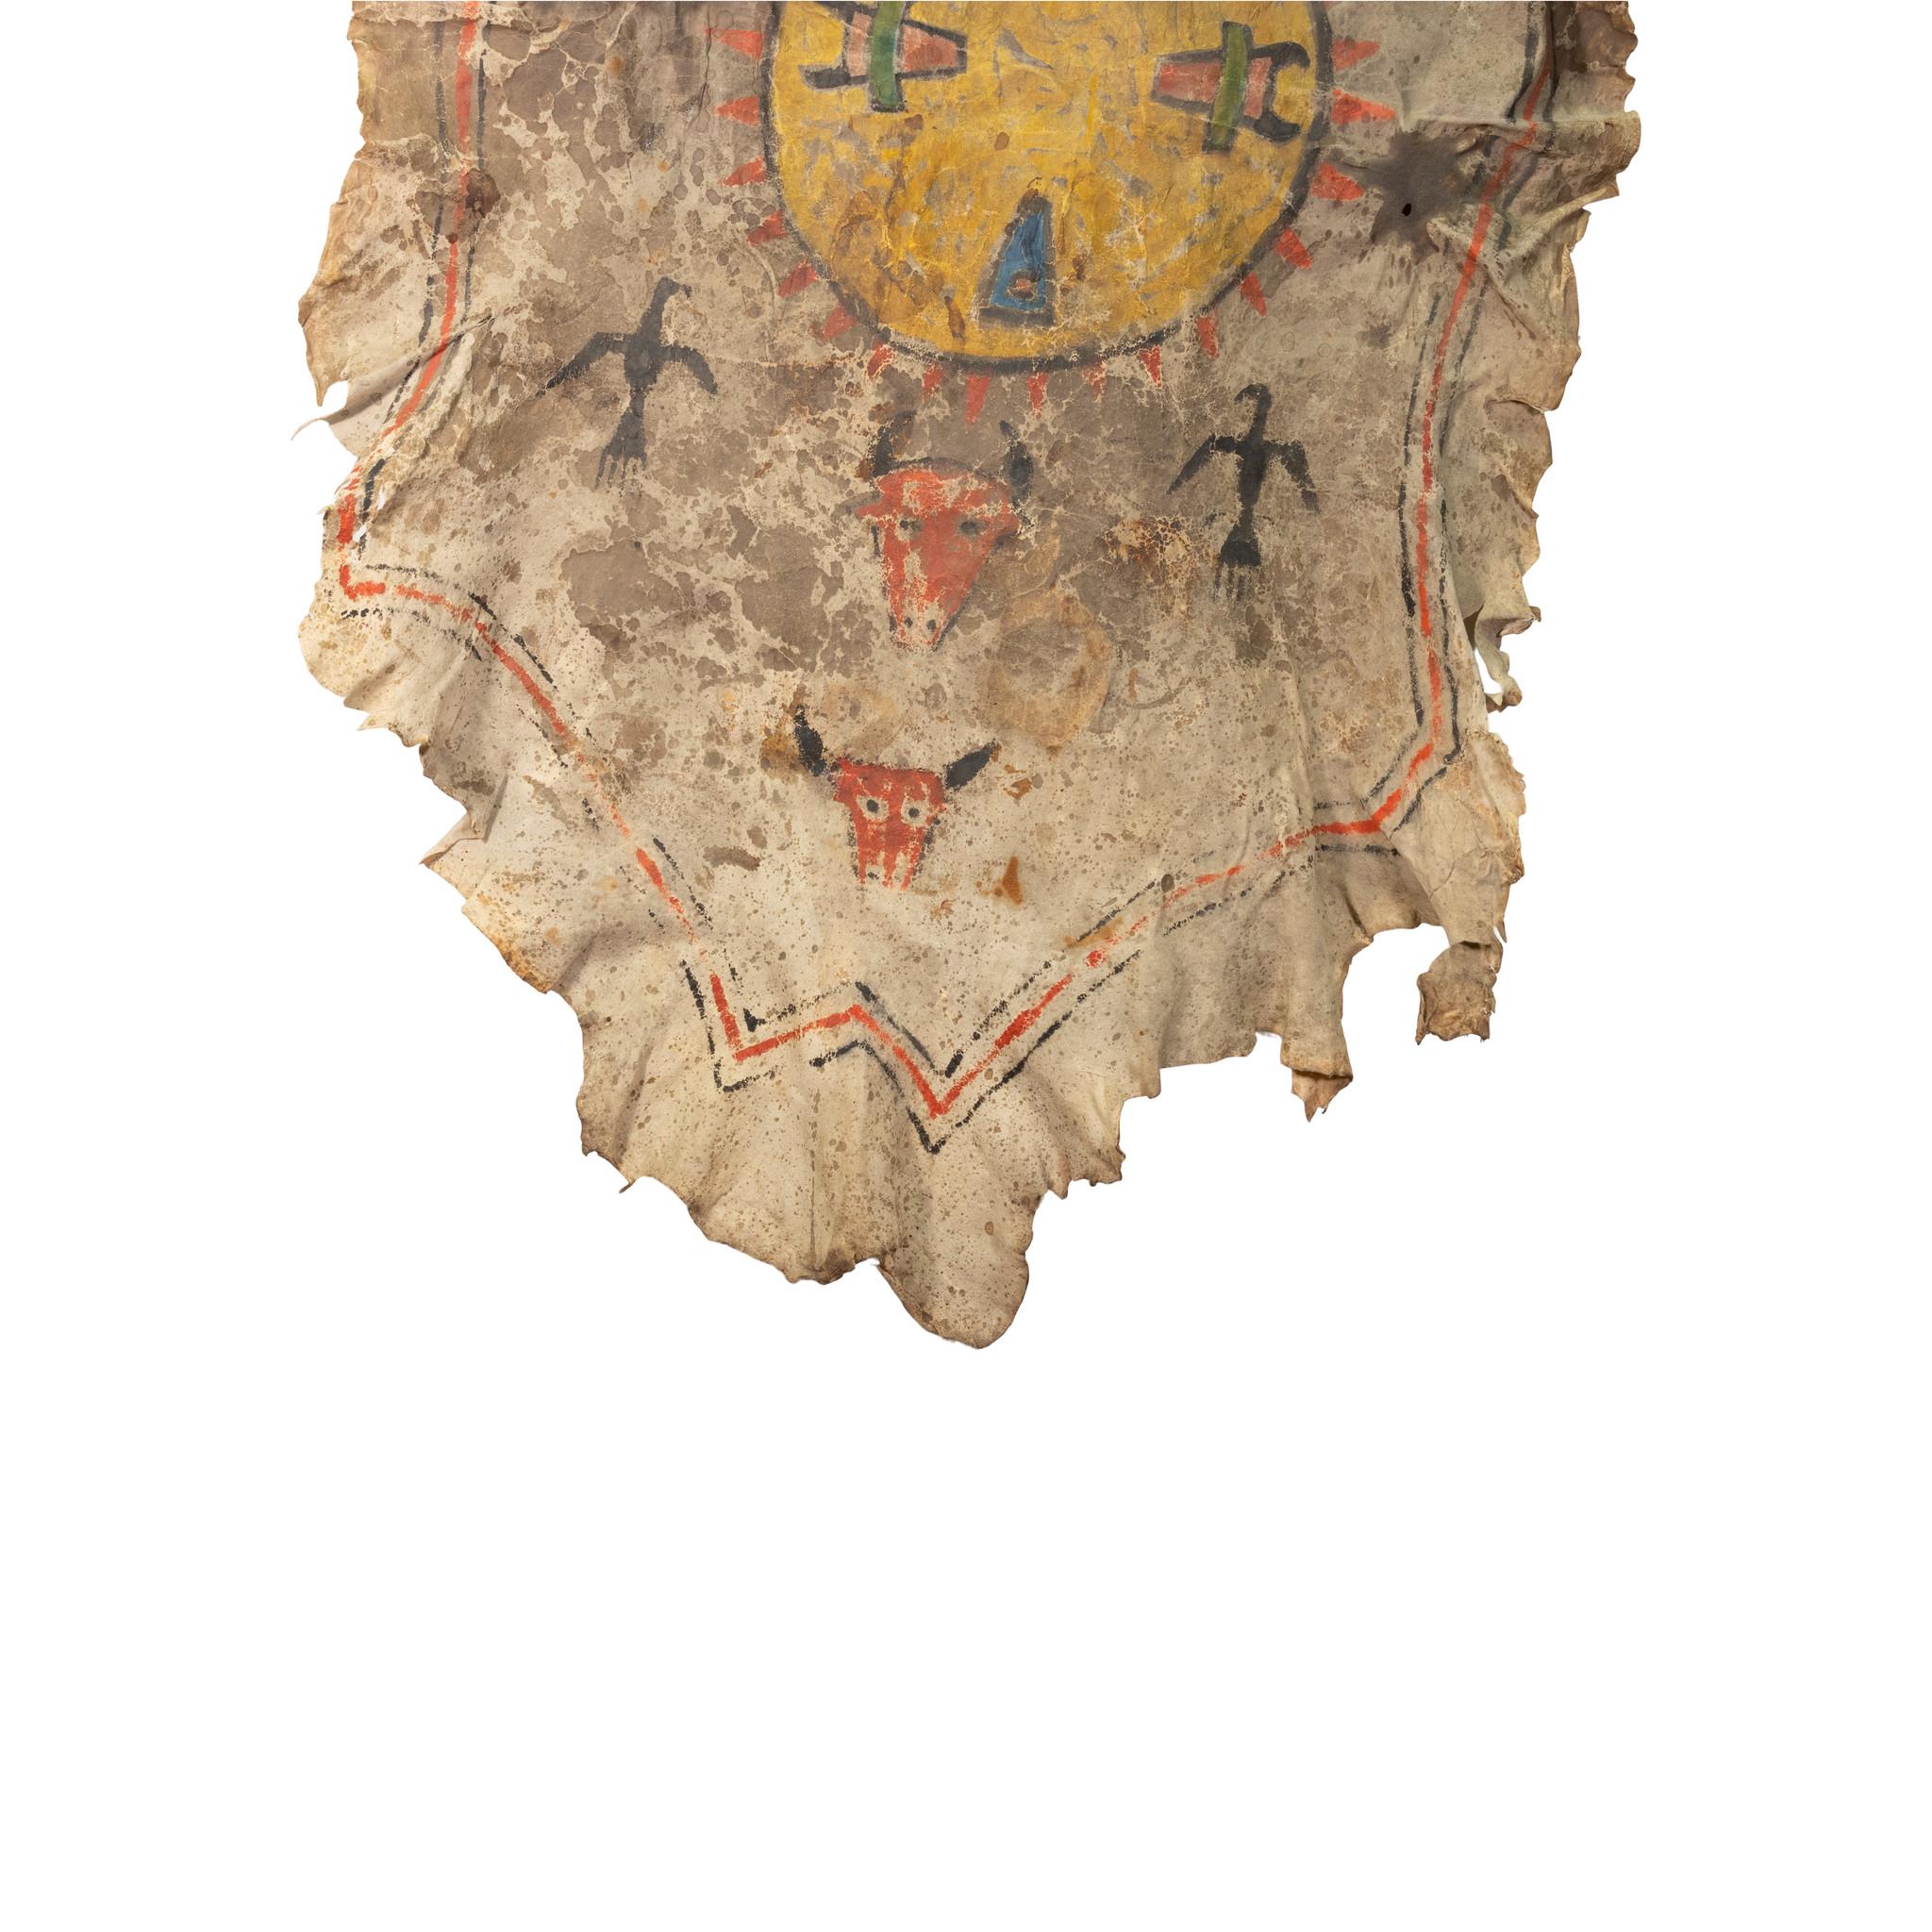 Northern Plains hide painting, buffalo society, pre-reservation. Two buffalo heads, two full body buffalos, two thunderbirds and buffalo sun shield in center. On brain tanned deer skin. Ex. Van Landingham

Period: Last half of the 19th